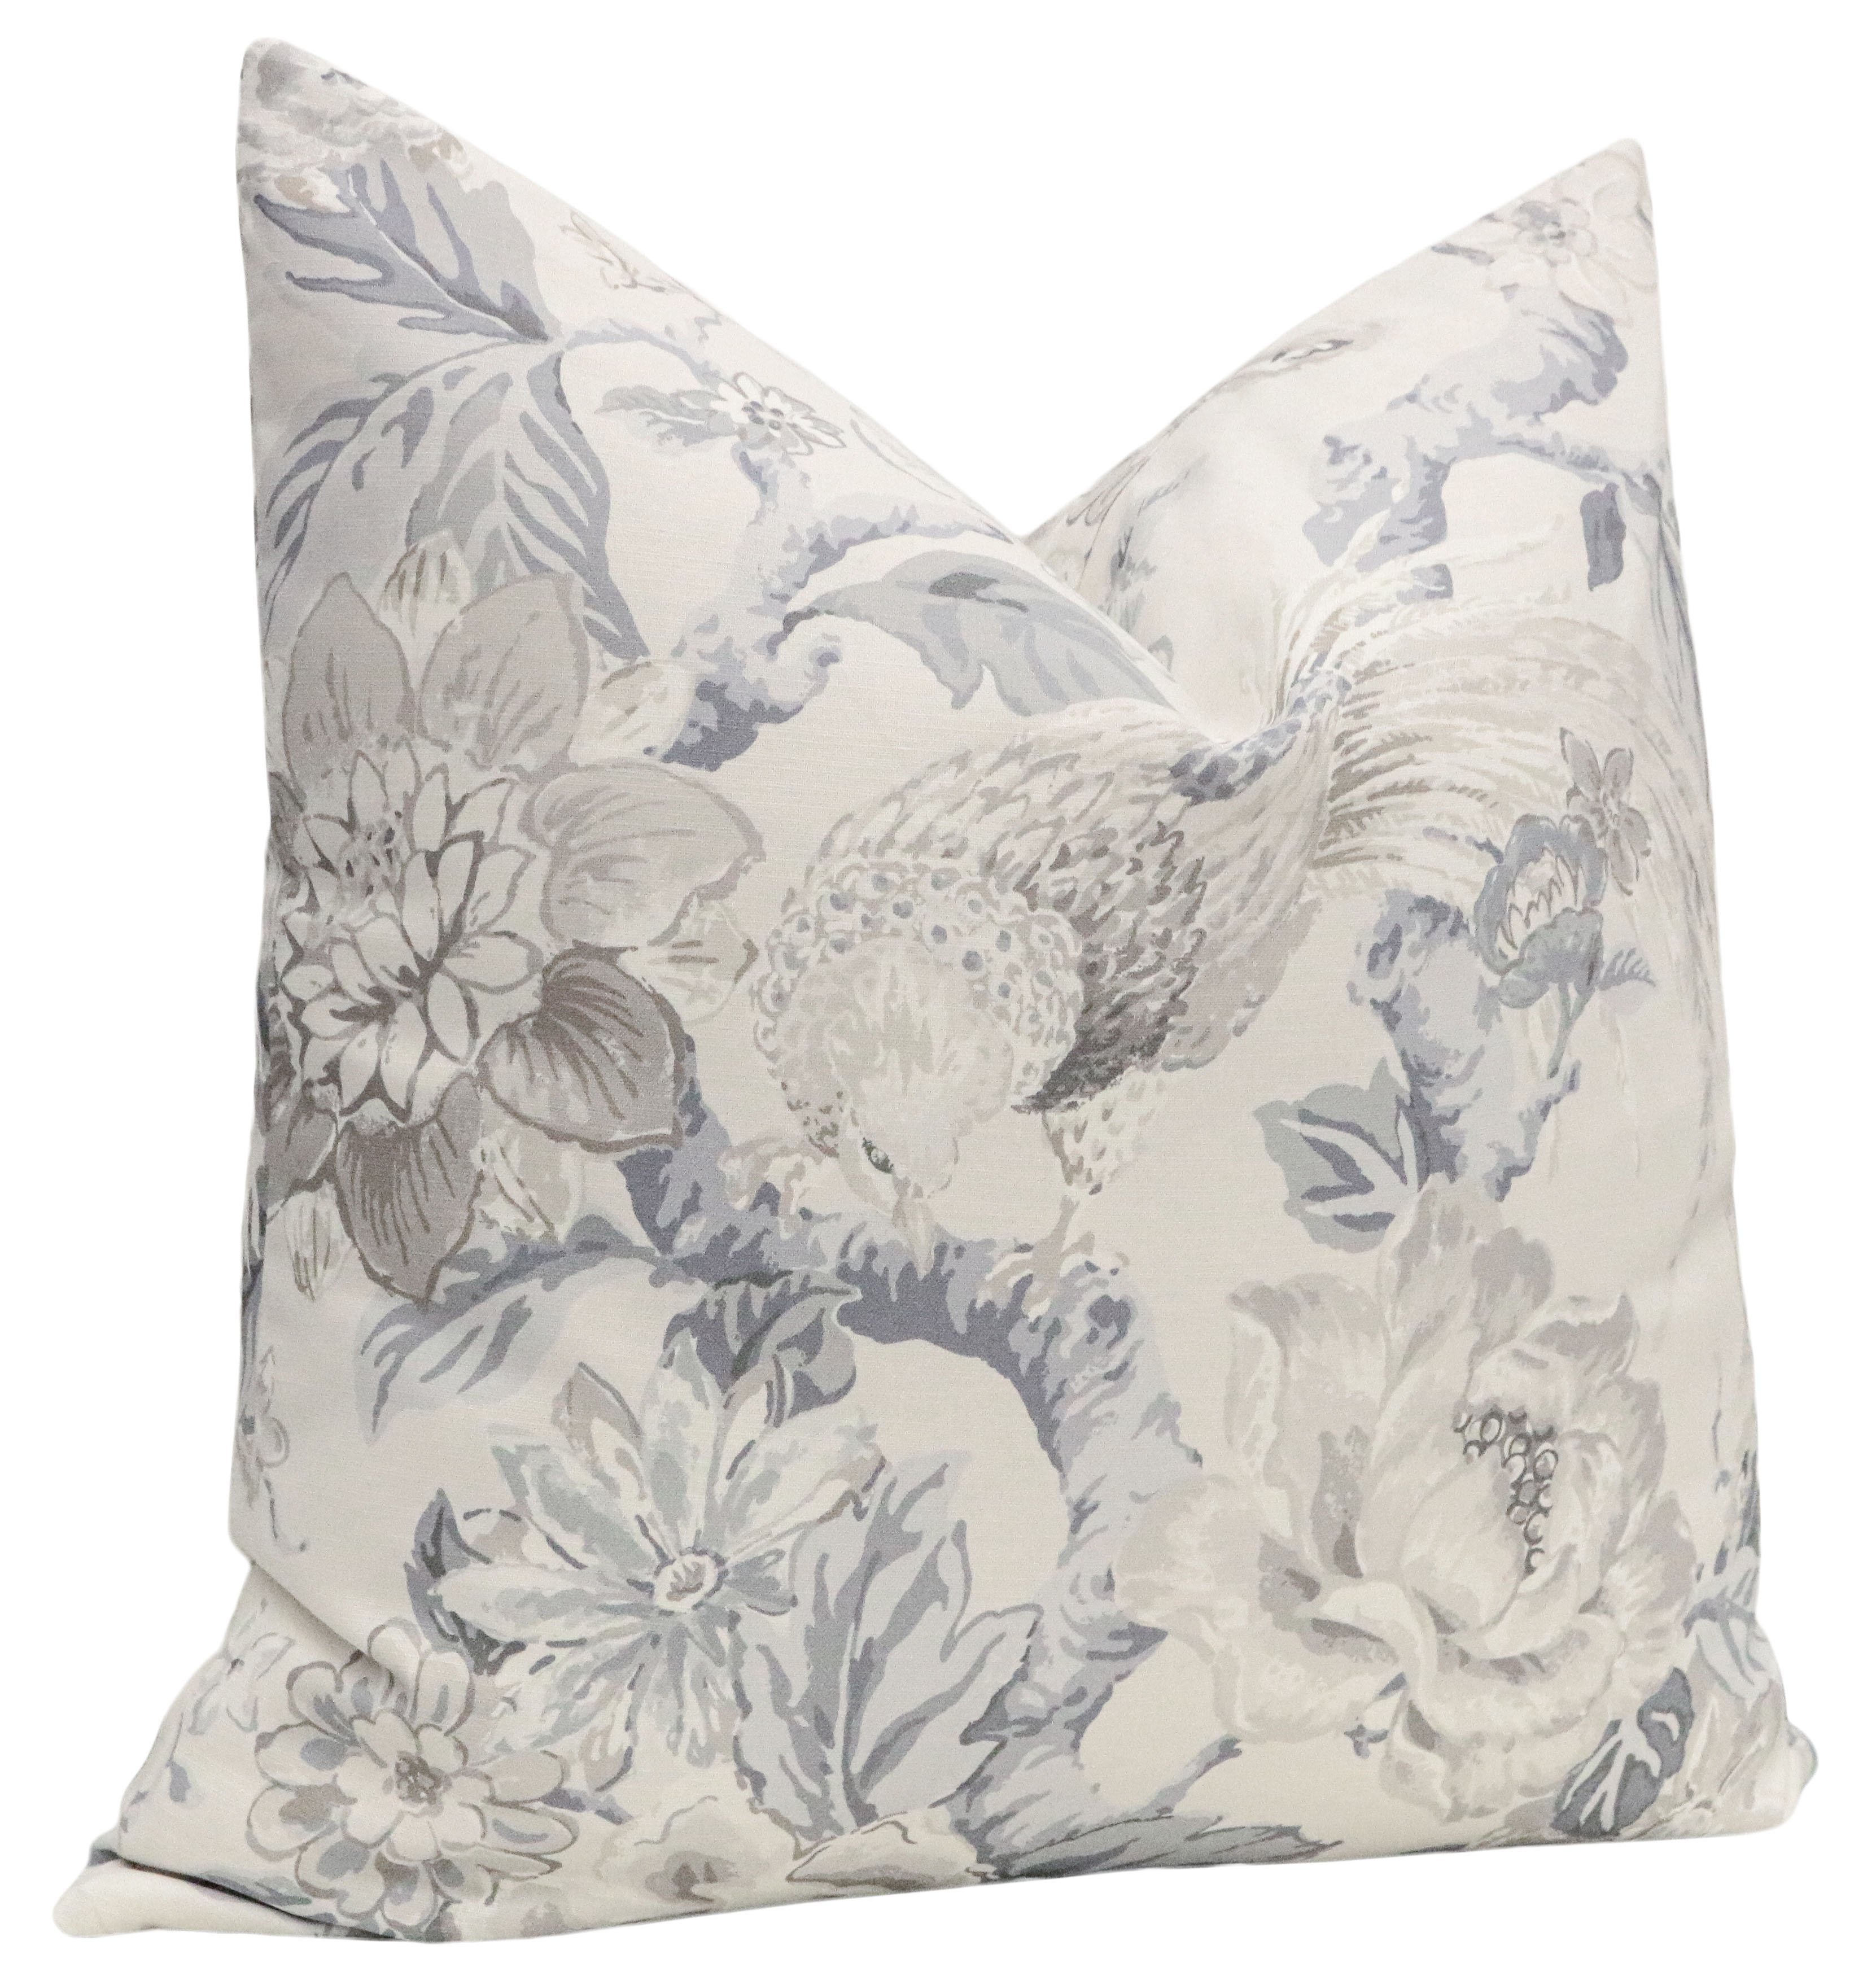 Floral Aviary Print Pillow Cover, Delft, 20" x 20" - Image 1